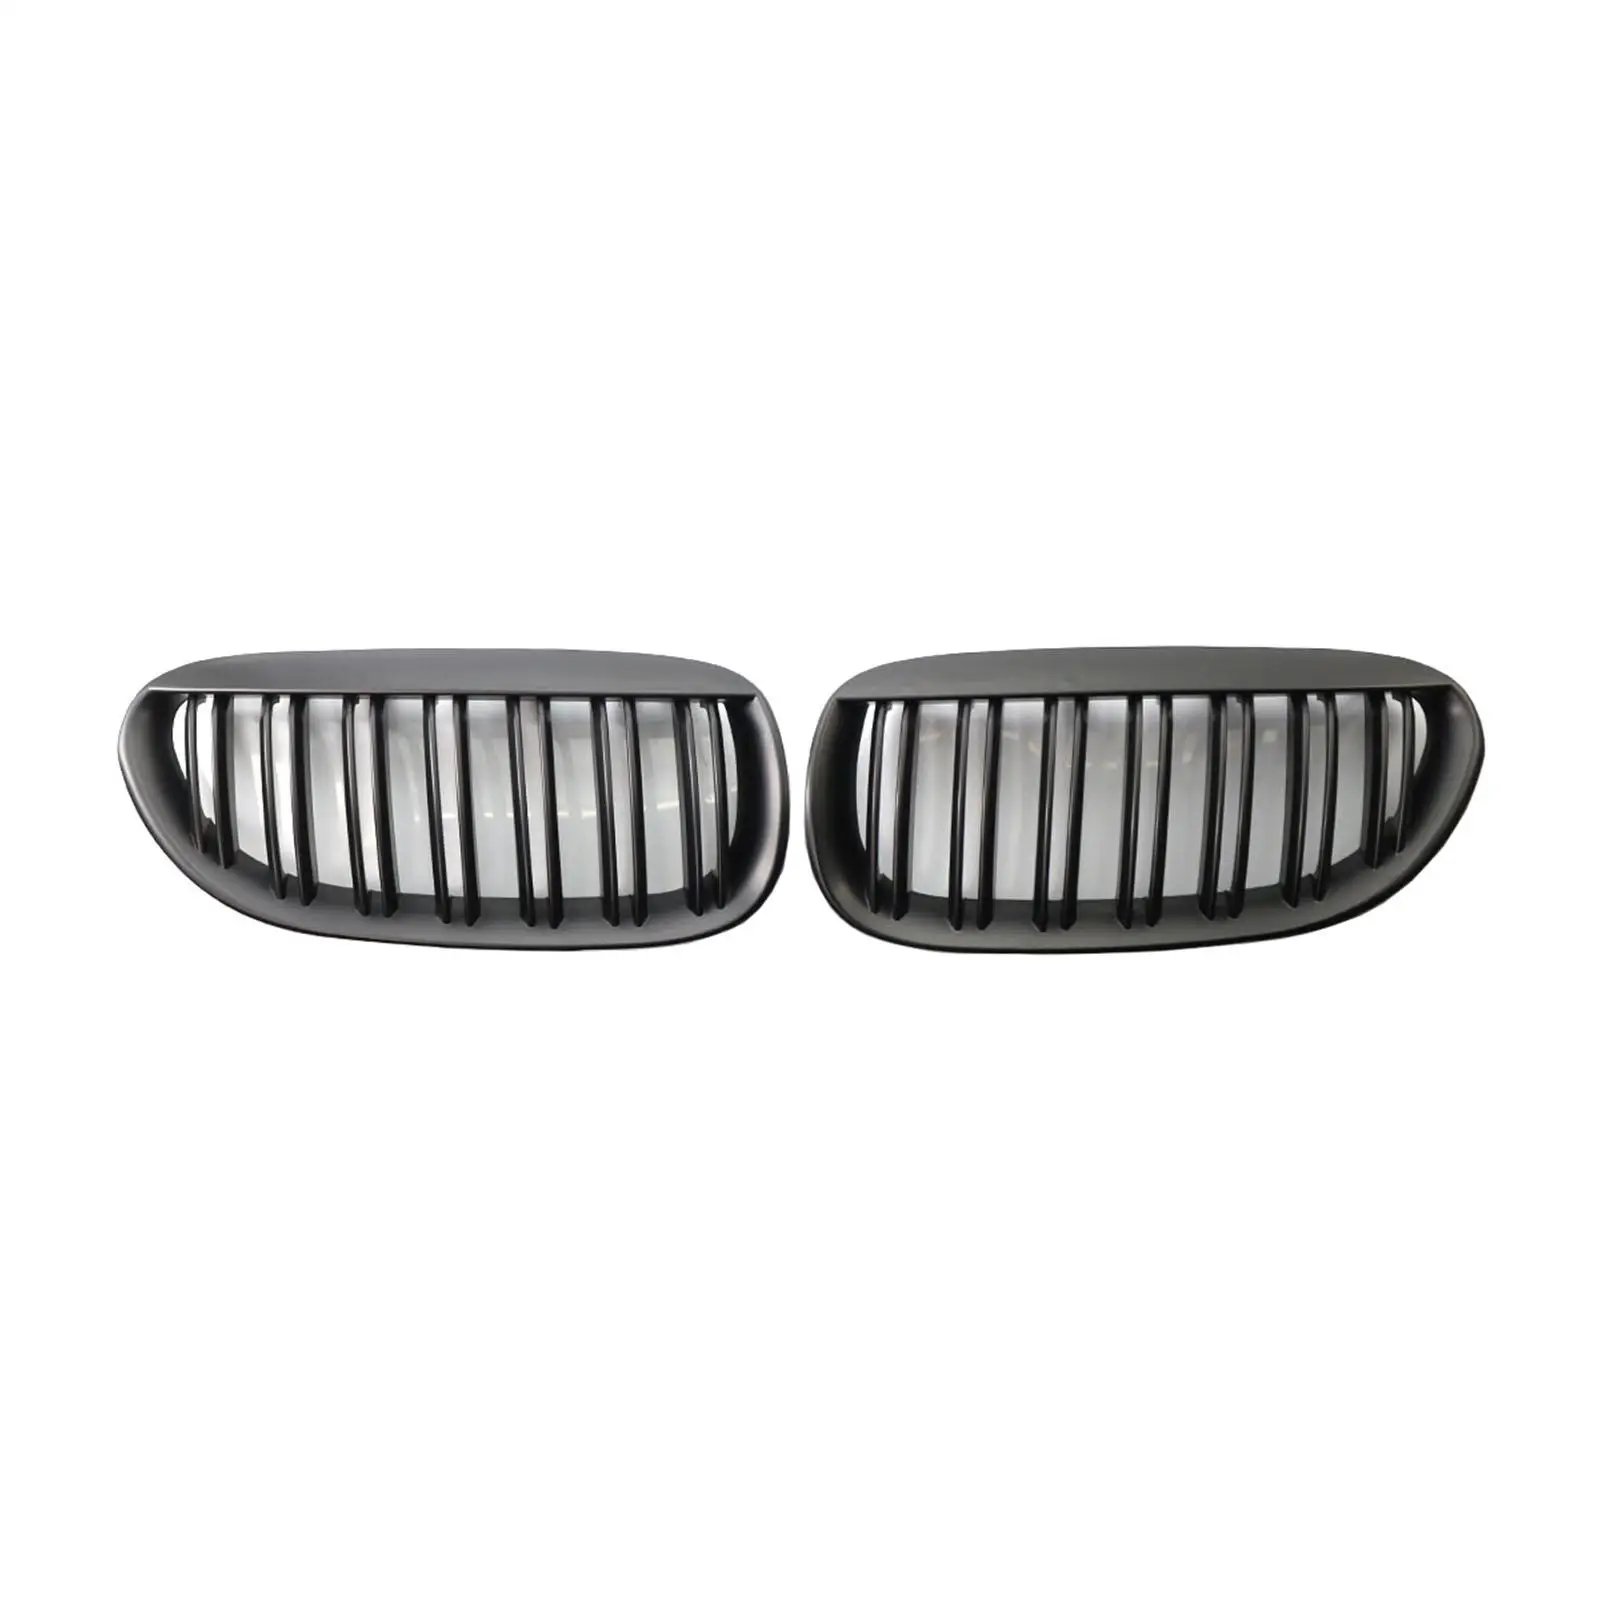 Black Double Slats Front Grille Mesh Grill Replacement for  E6